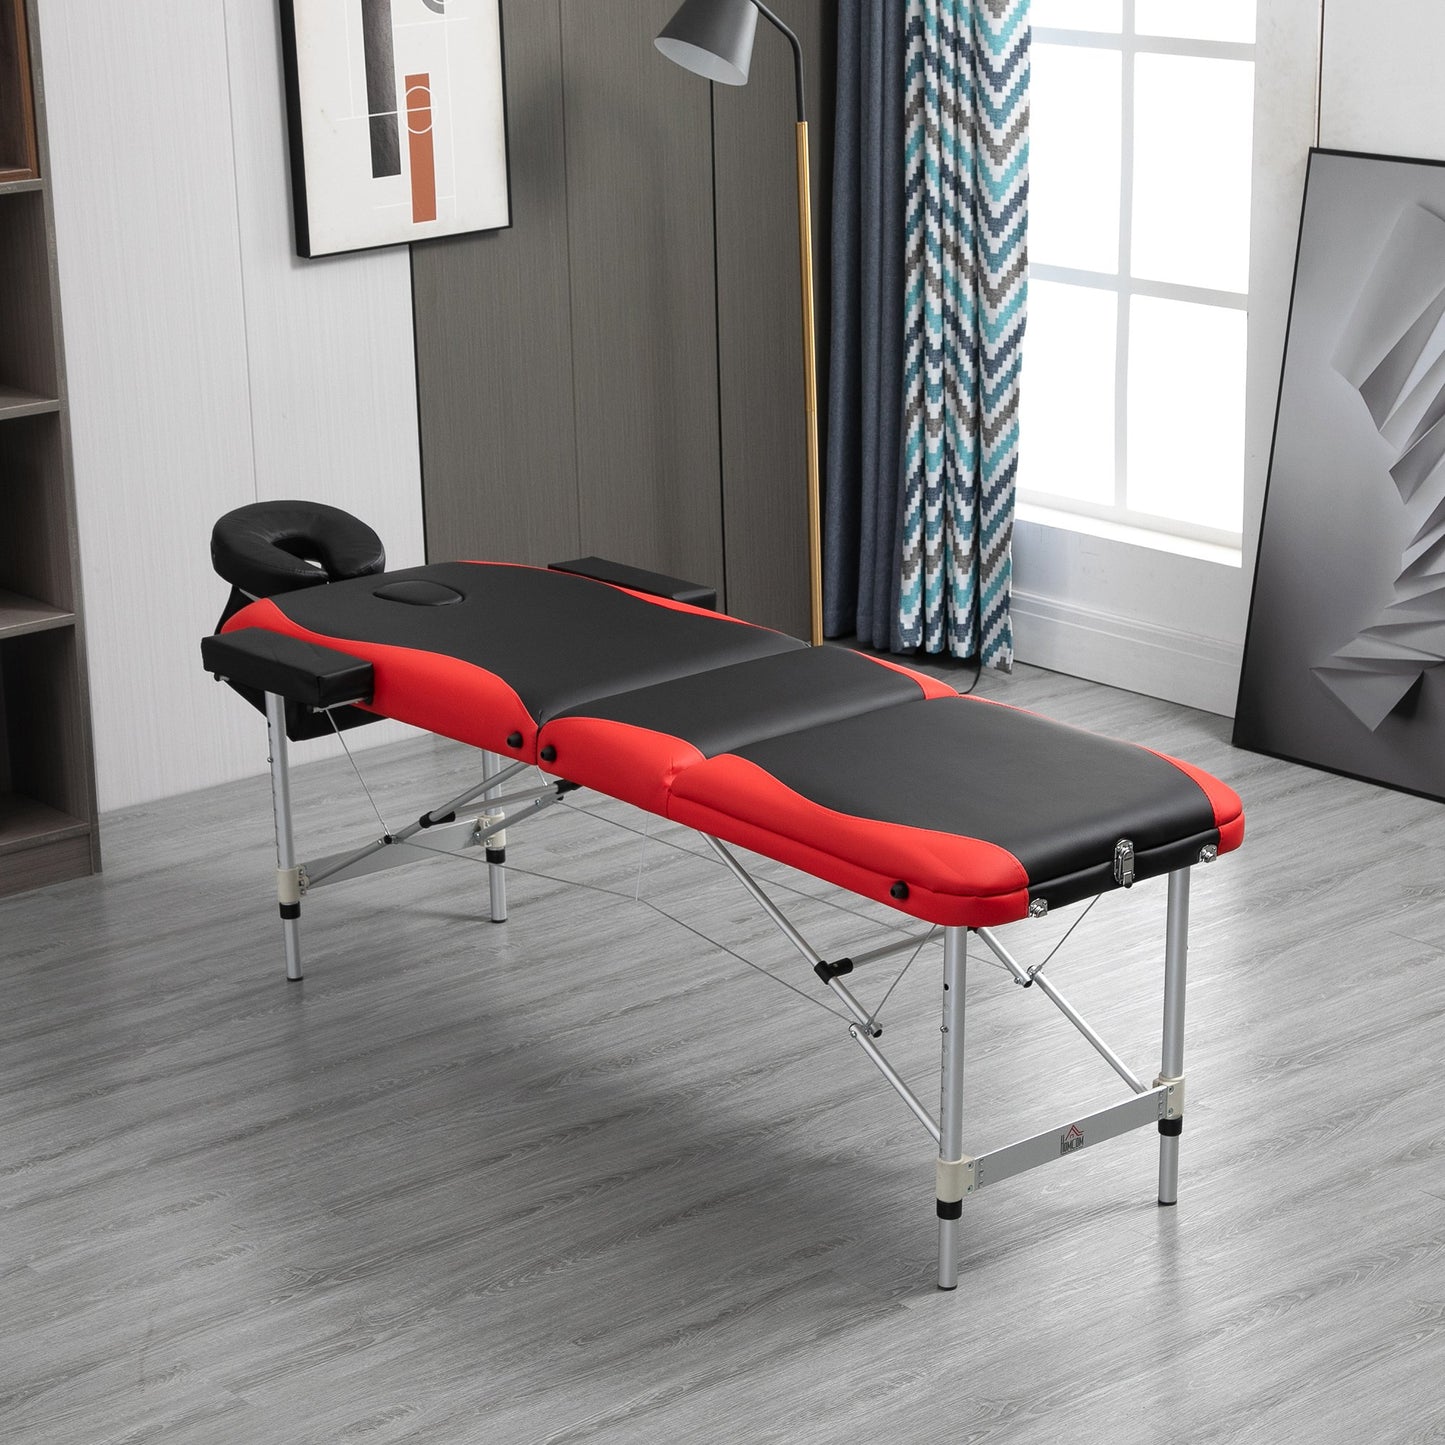 HOMCOM Professional Portable Massage Table Beauty Bed W/ Headrest - Black/Red